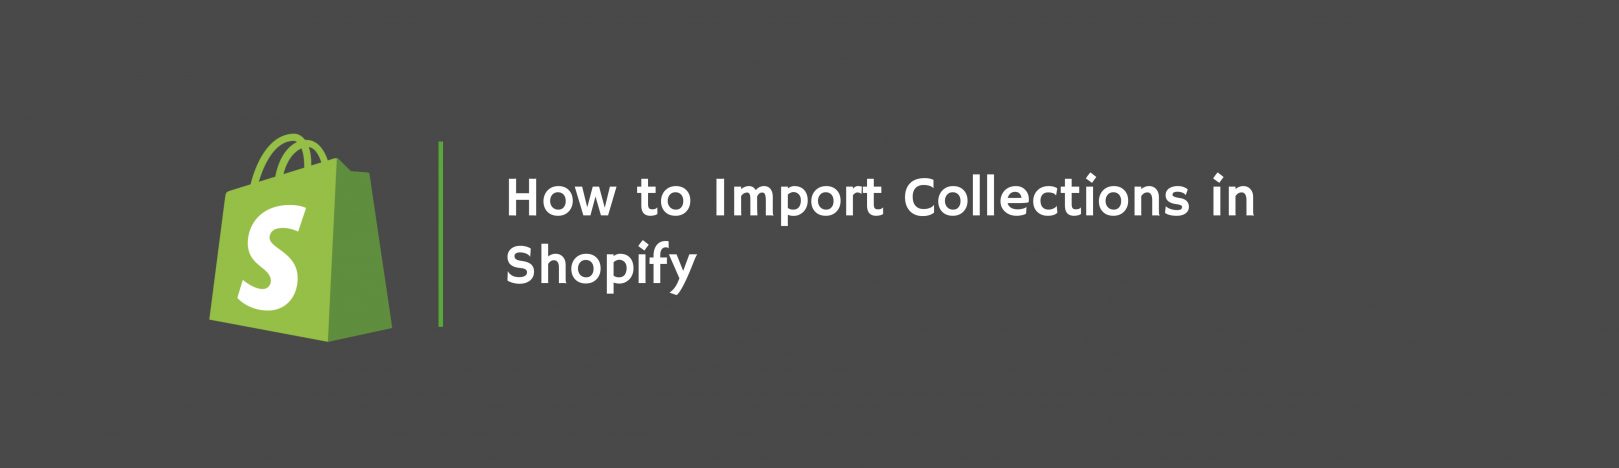 import-collections-in-shopify